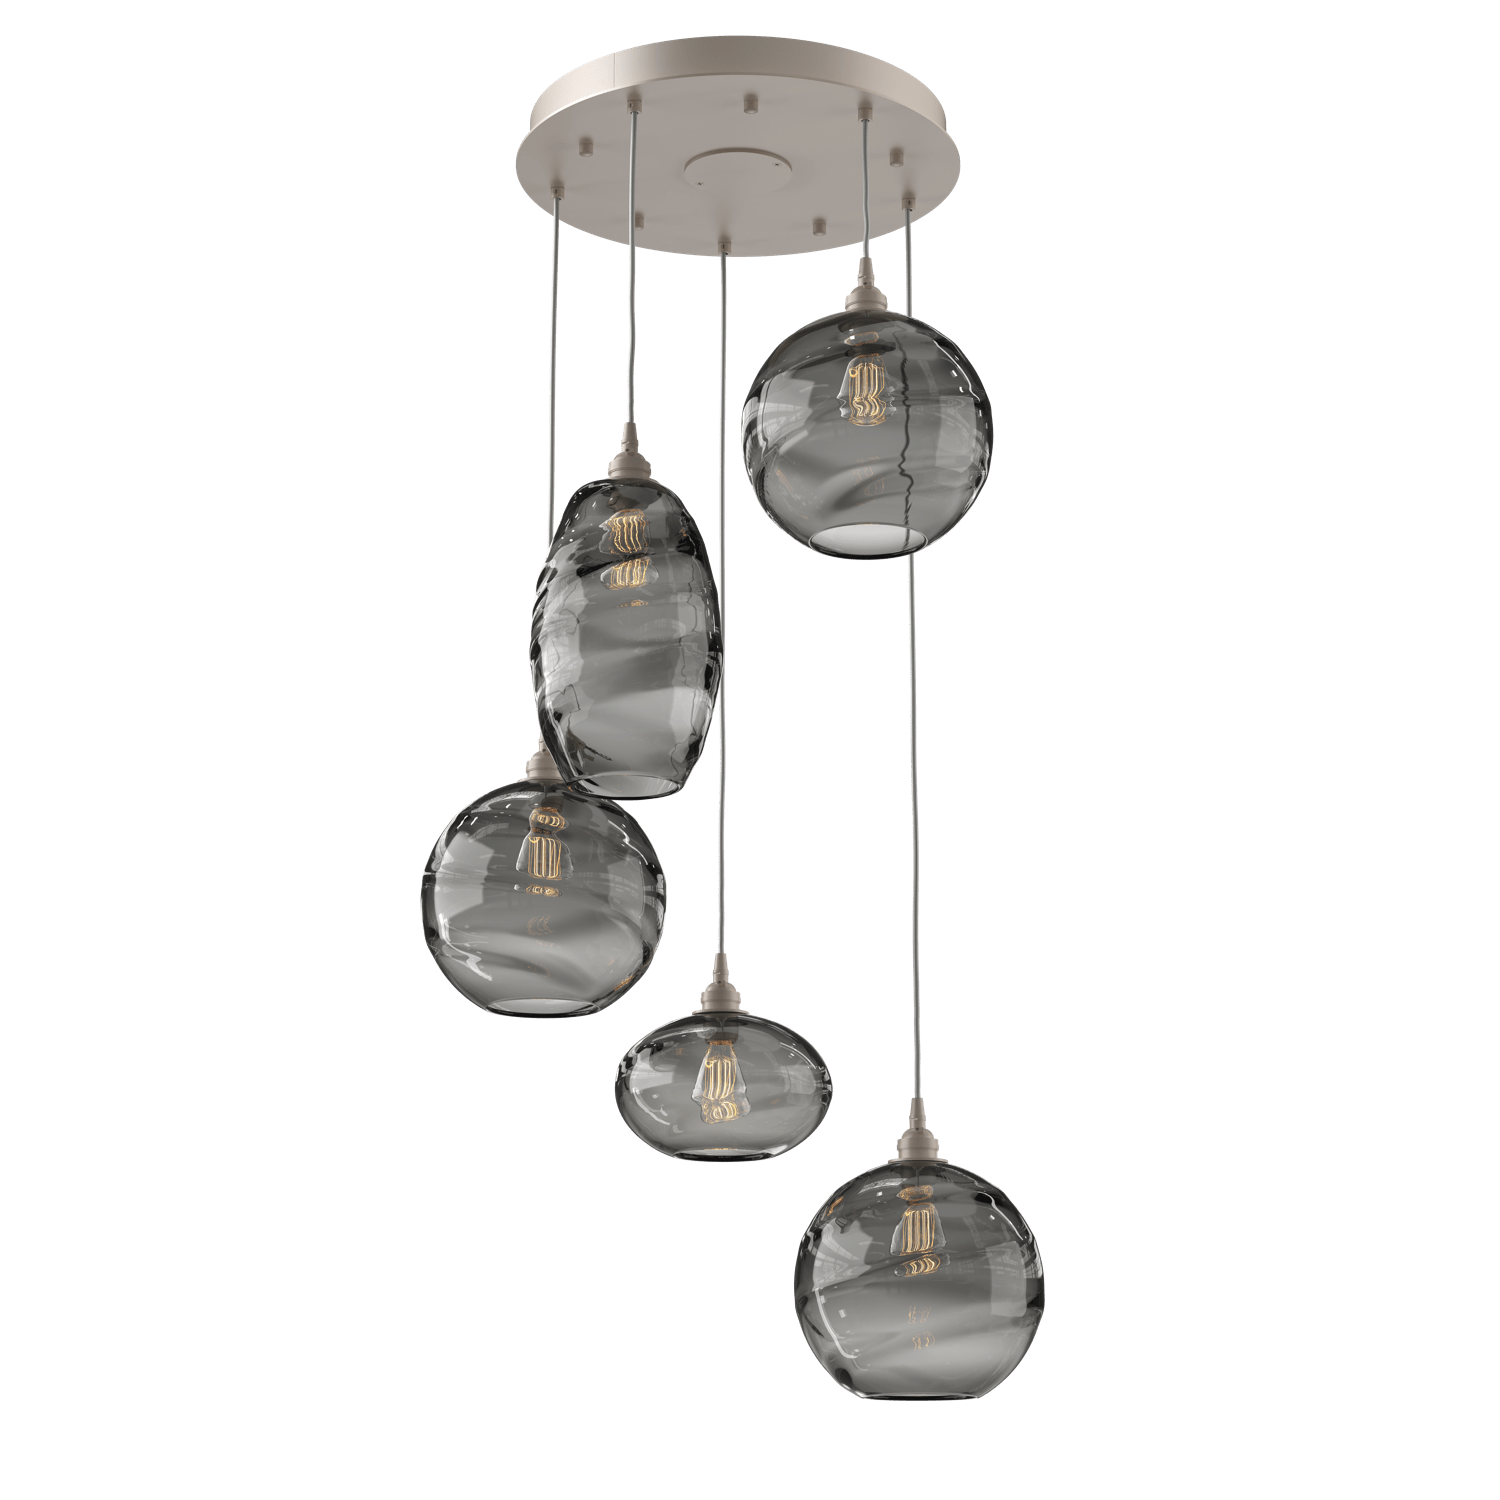 CHB0048-05-BS-OS-Hammerton-Studio-Optic-Blown-Glass-Misto-5-light-round-pendant-chandelier-with-metallic-beige-silver-finish-and-optic-smoke-blown-glass-shades-and-incandescent-lamping